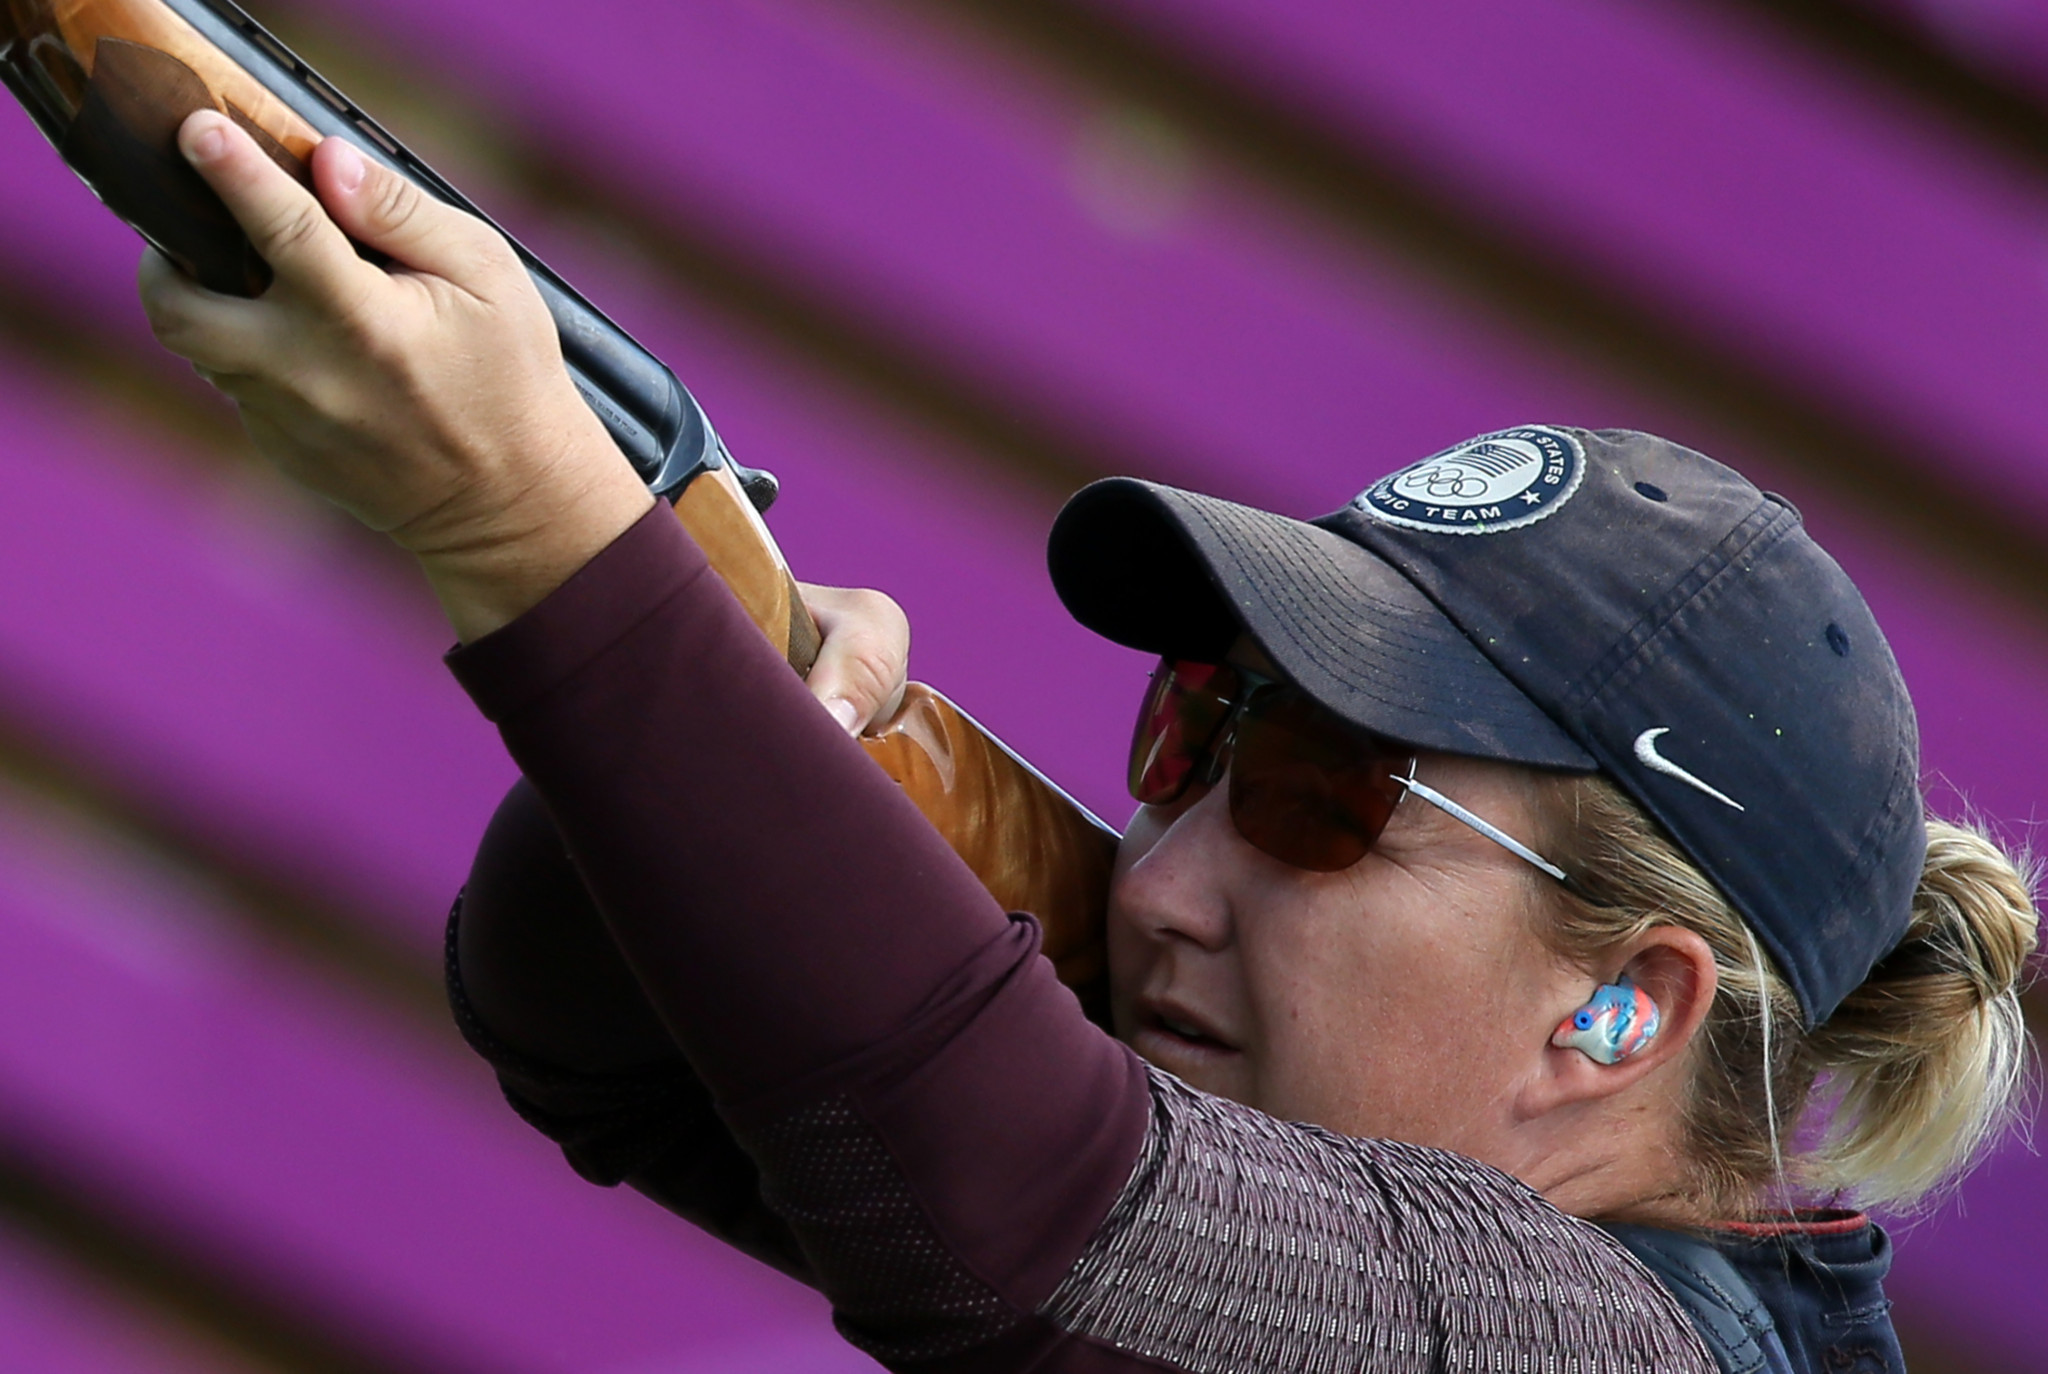 KImberly Rhode is well placed to challenge for the women's skeet title at the ISSF Shotgun World Championships after the opening day of qualifying today in Italy ©Getty Images